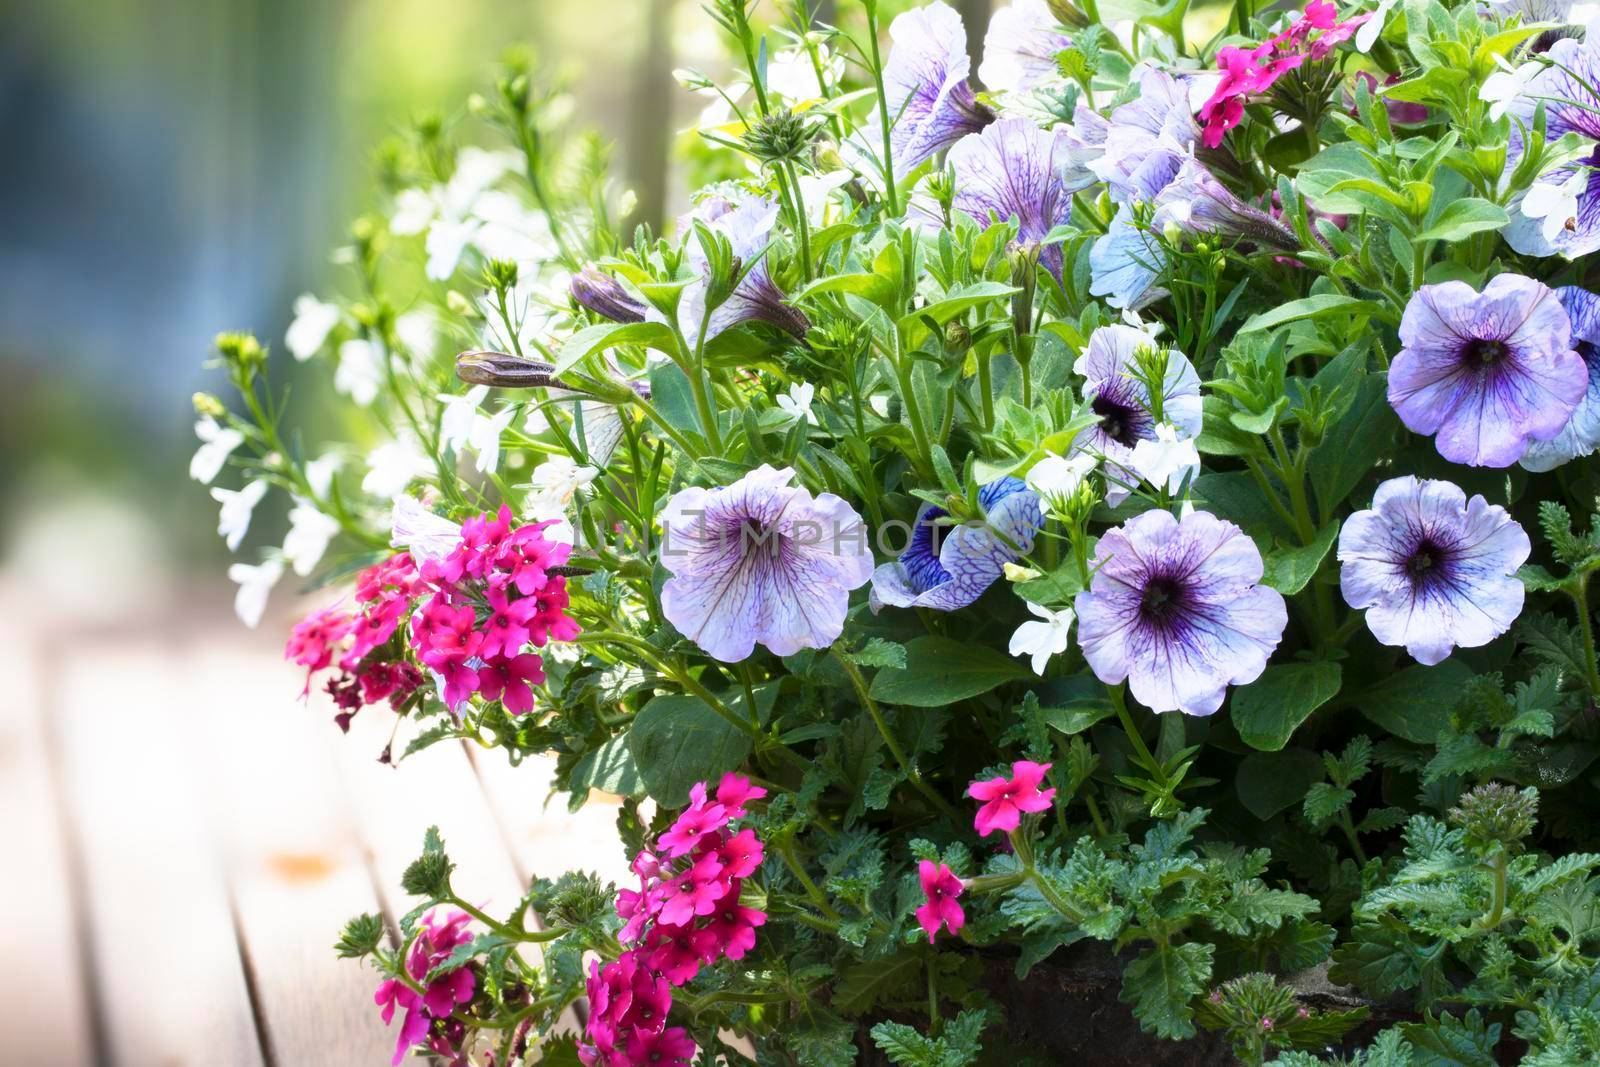 Spring flower basket with variegated purple petunias and pink verbena flowers on outdoor wooden table.